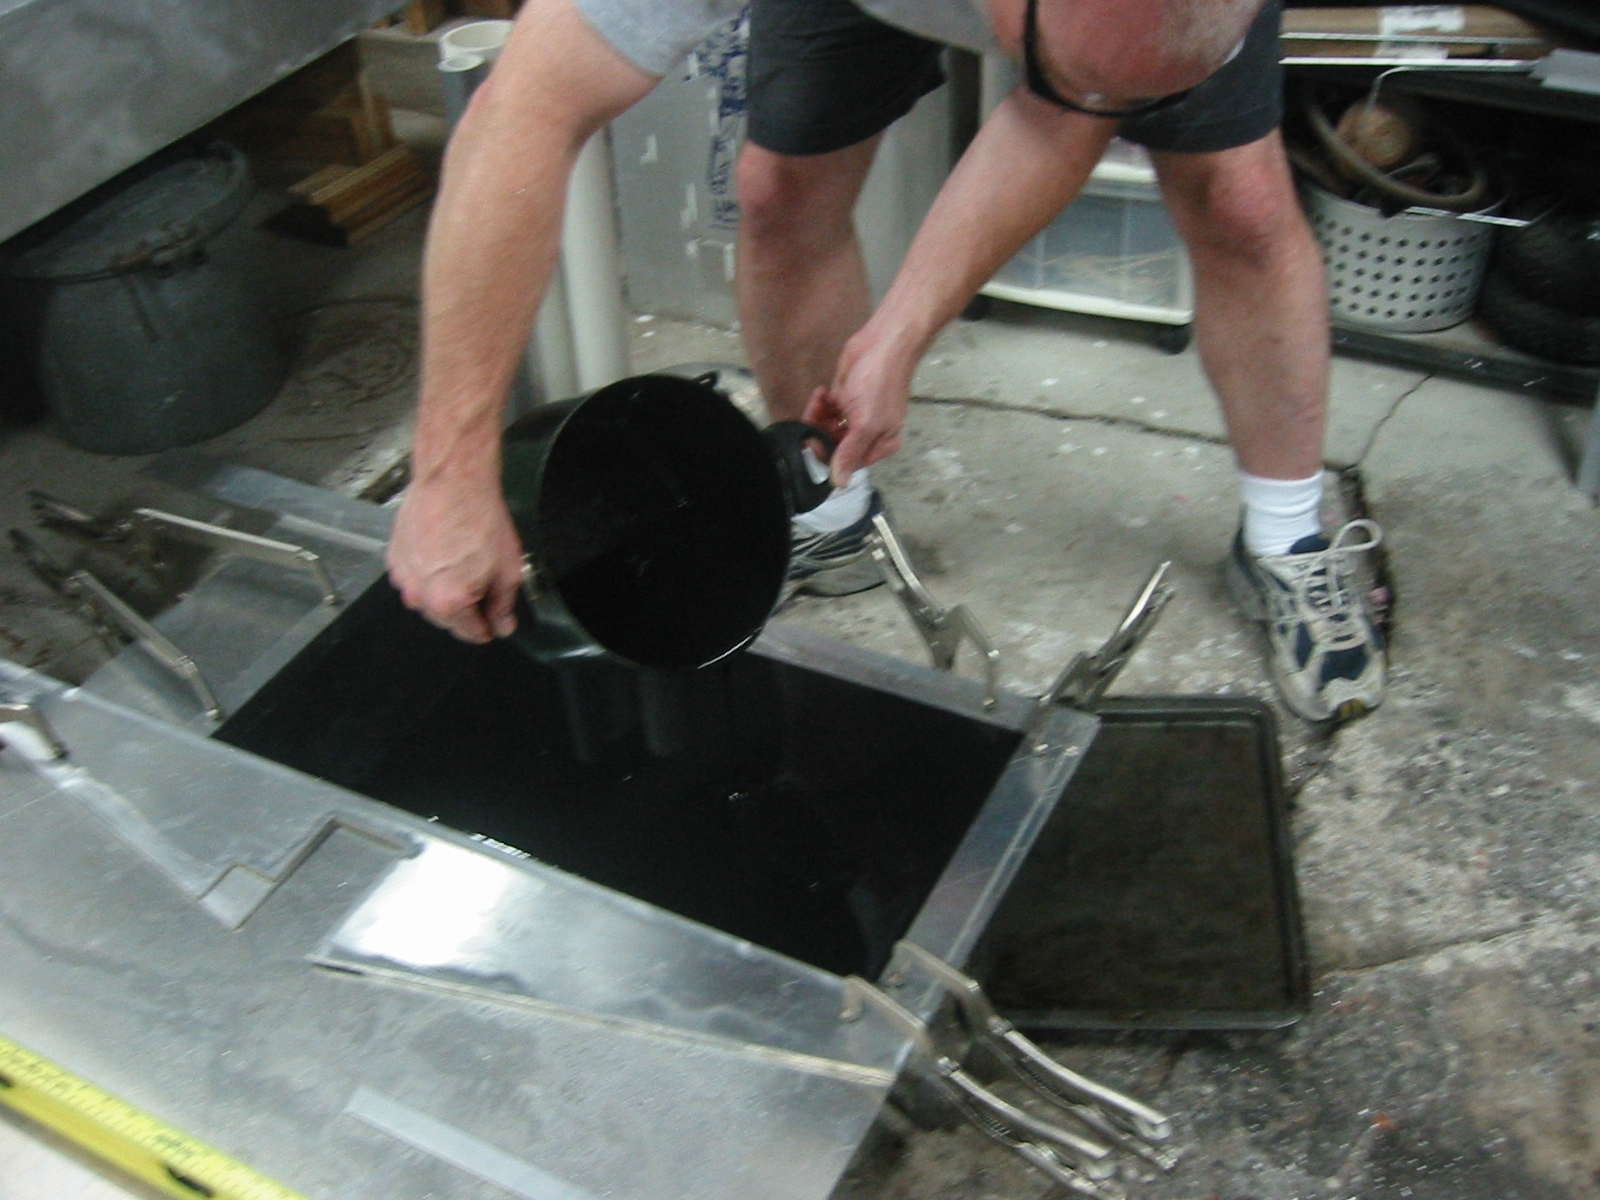 (2) Machineable wax being poured into the mold.